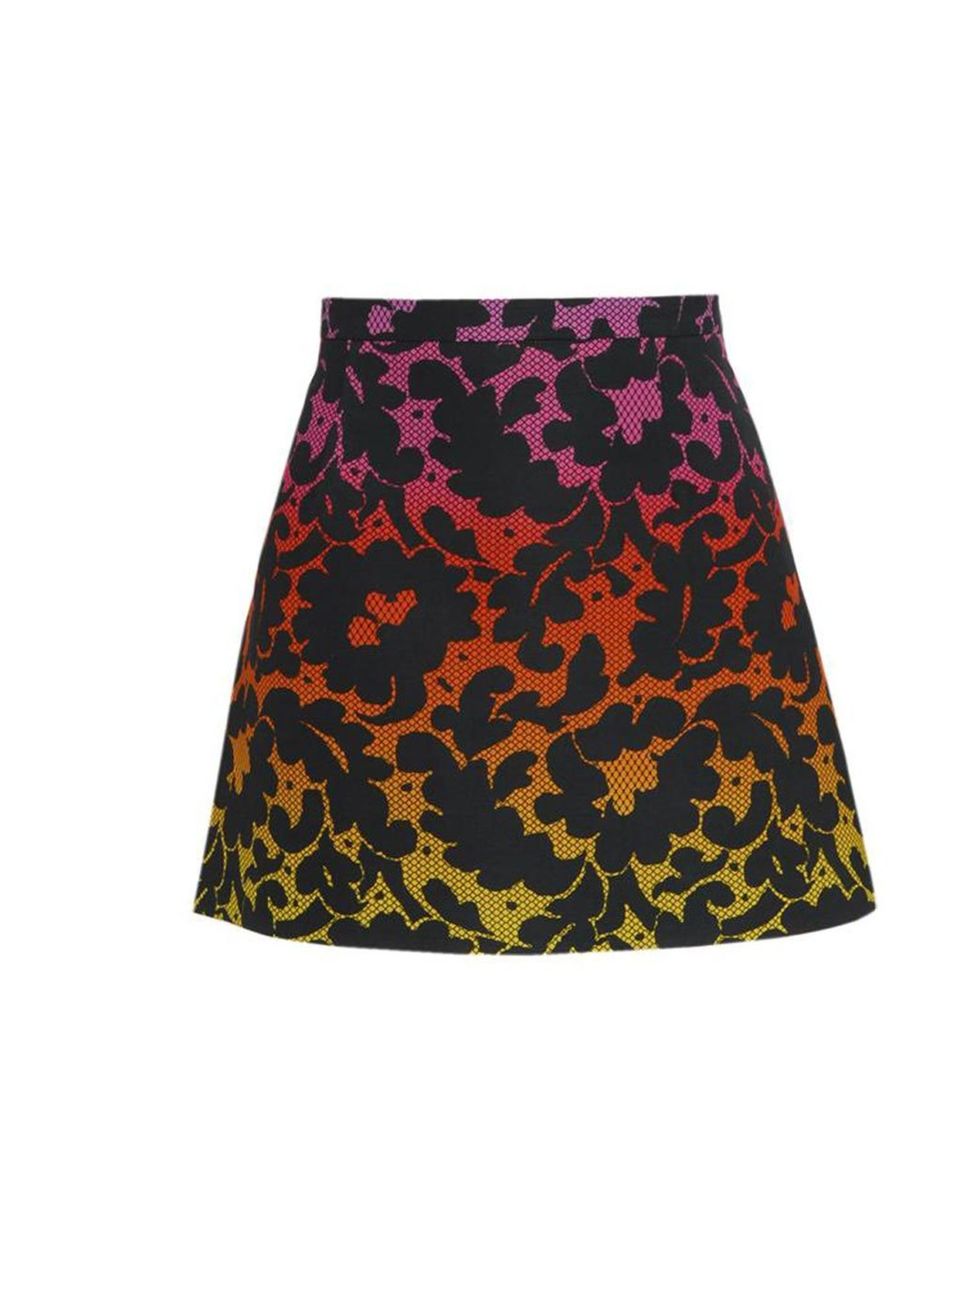 <p>Christopher Kane printed mini skirt, £455, at Browns</p><p><a href="http://shopping.elleuk.com/browse?fts=christopher+kane+printed+a-line+mini+skirt">BUY NOW</a></p>